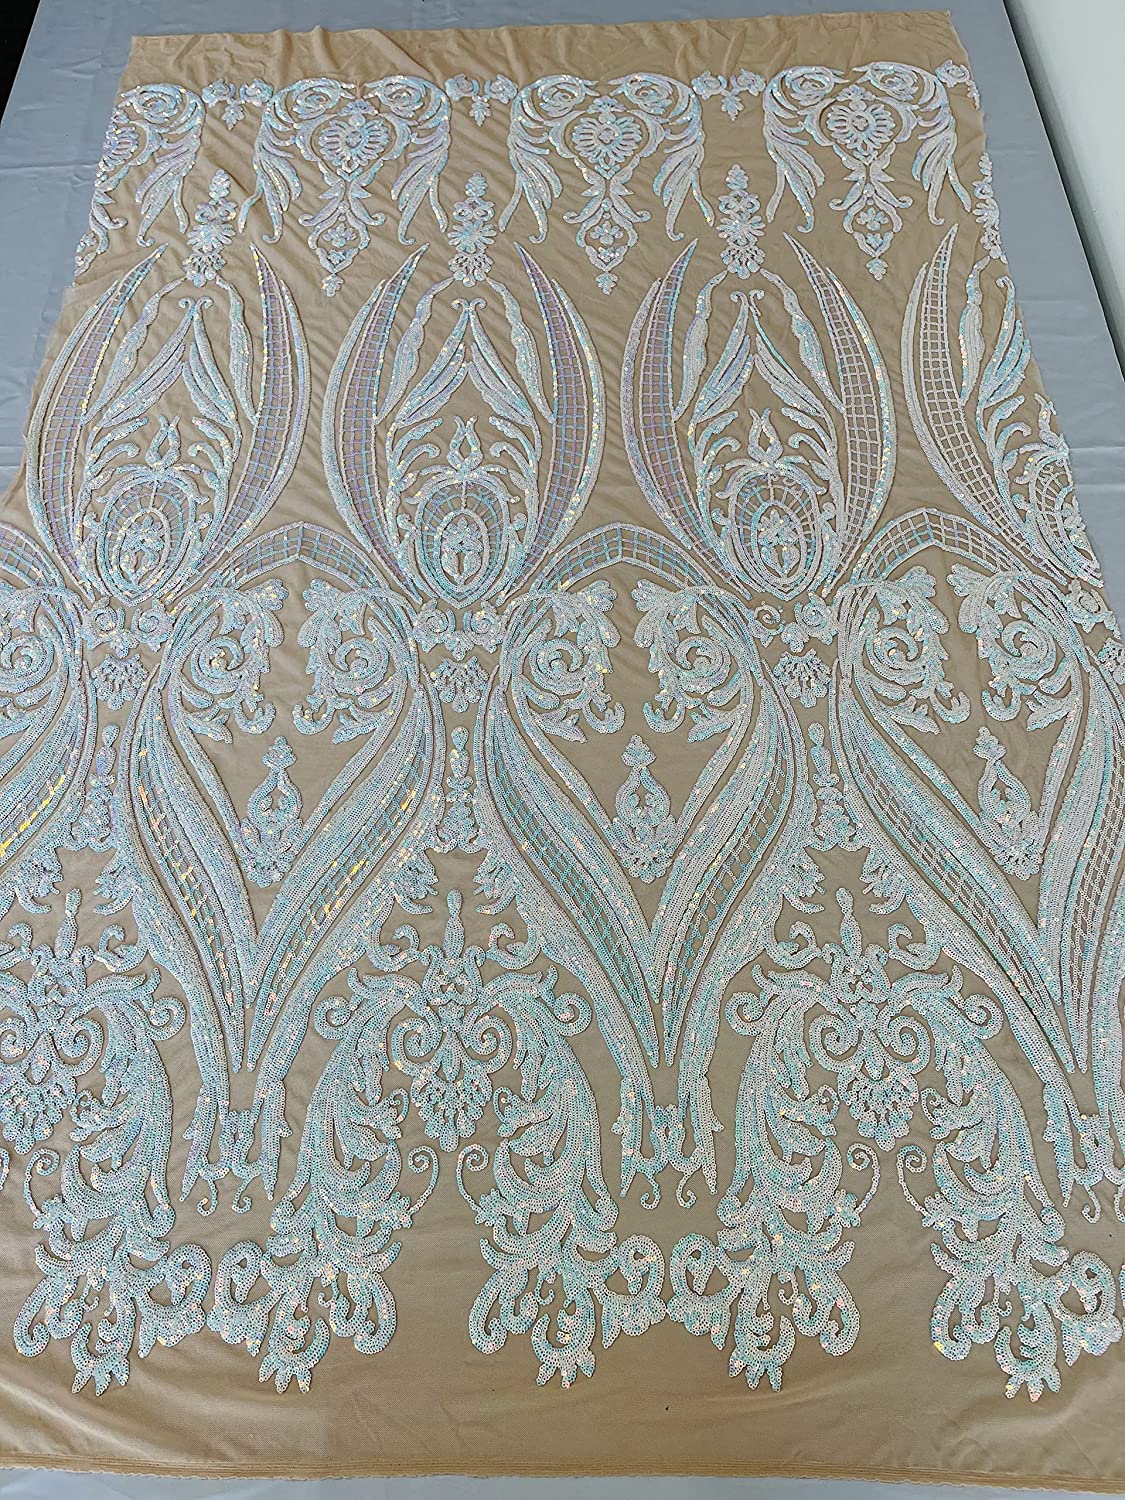 Empire Damask Design with Sequins Embroider On A 4 Way Stretch Mesh Fabric (1 Yard, Aqua Iridescent on Nude)